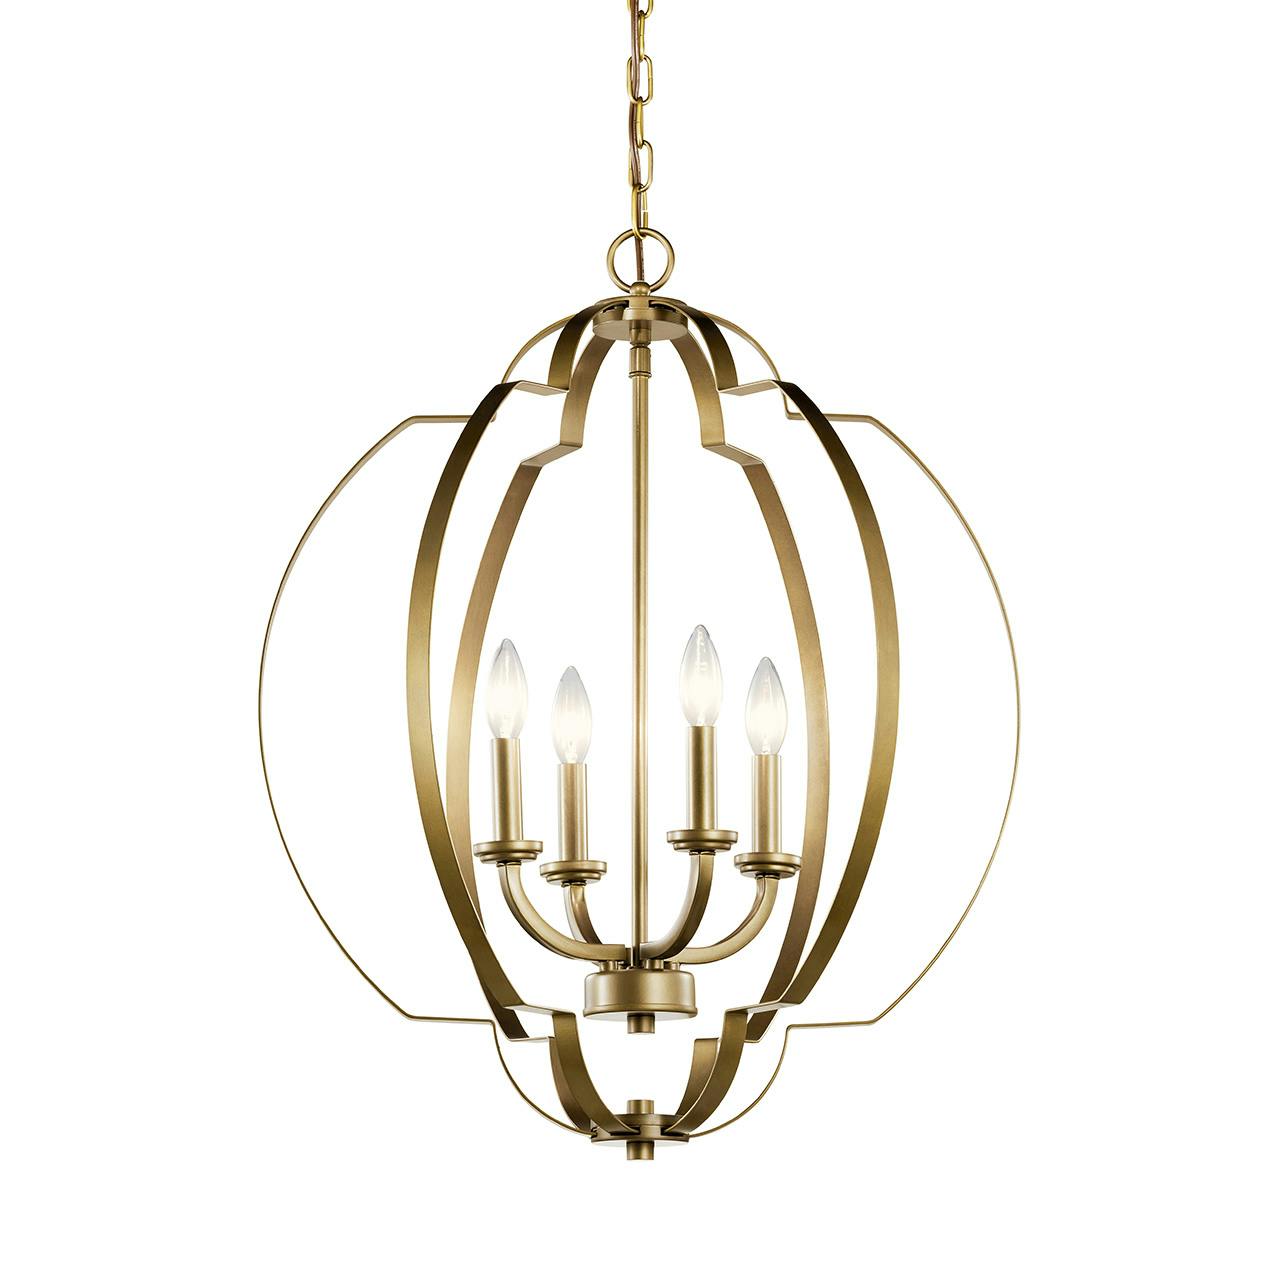 Voleta 26.25" 4 Light Foyer Pendant Brass without the canopy on a white background